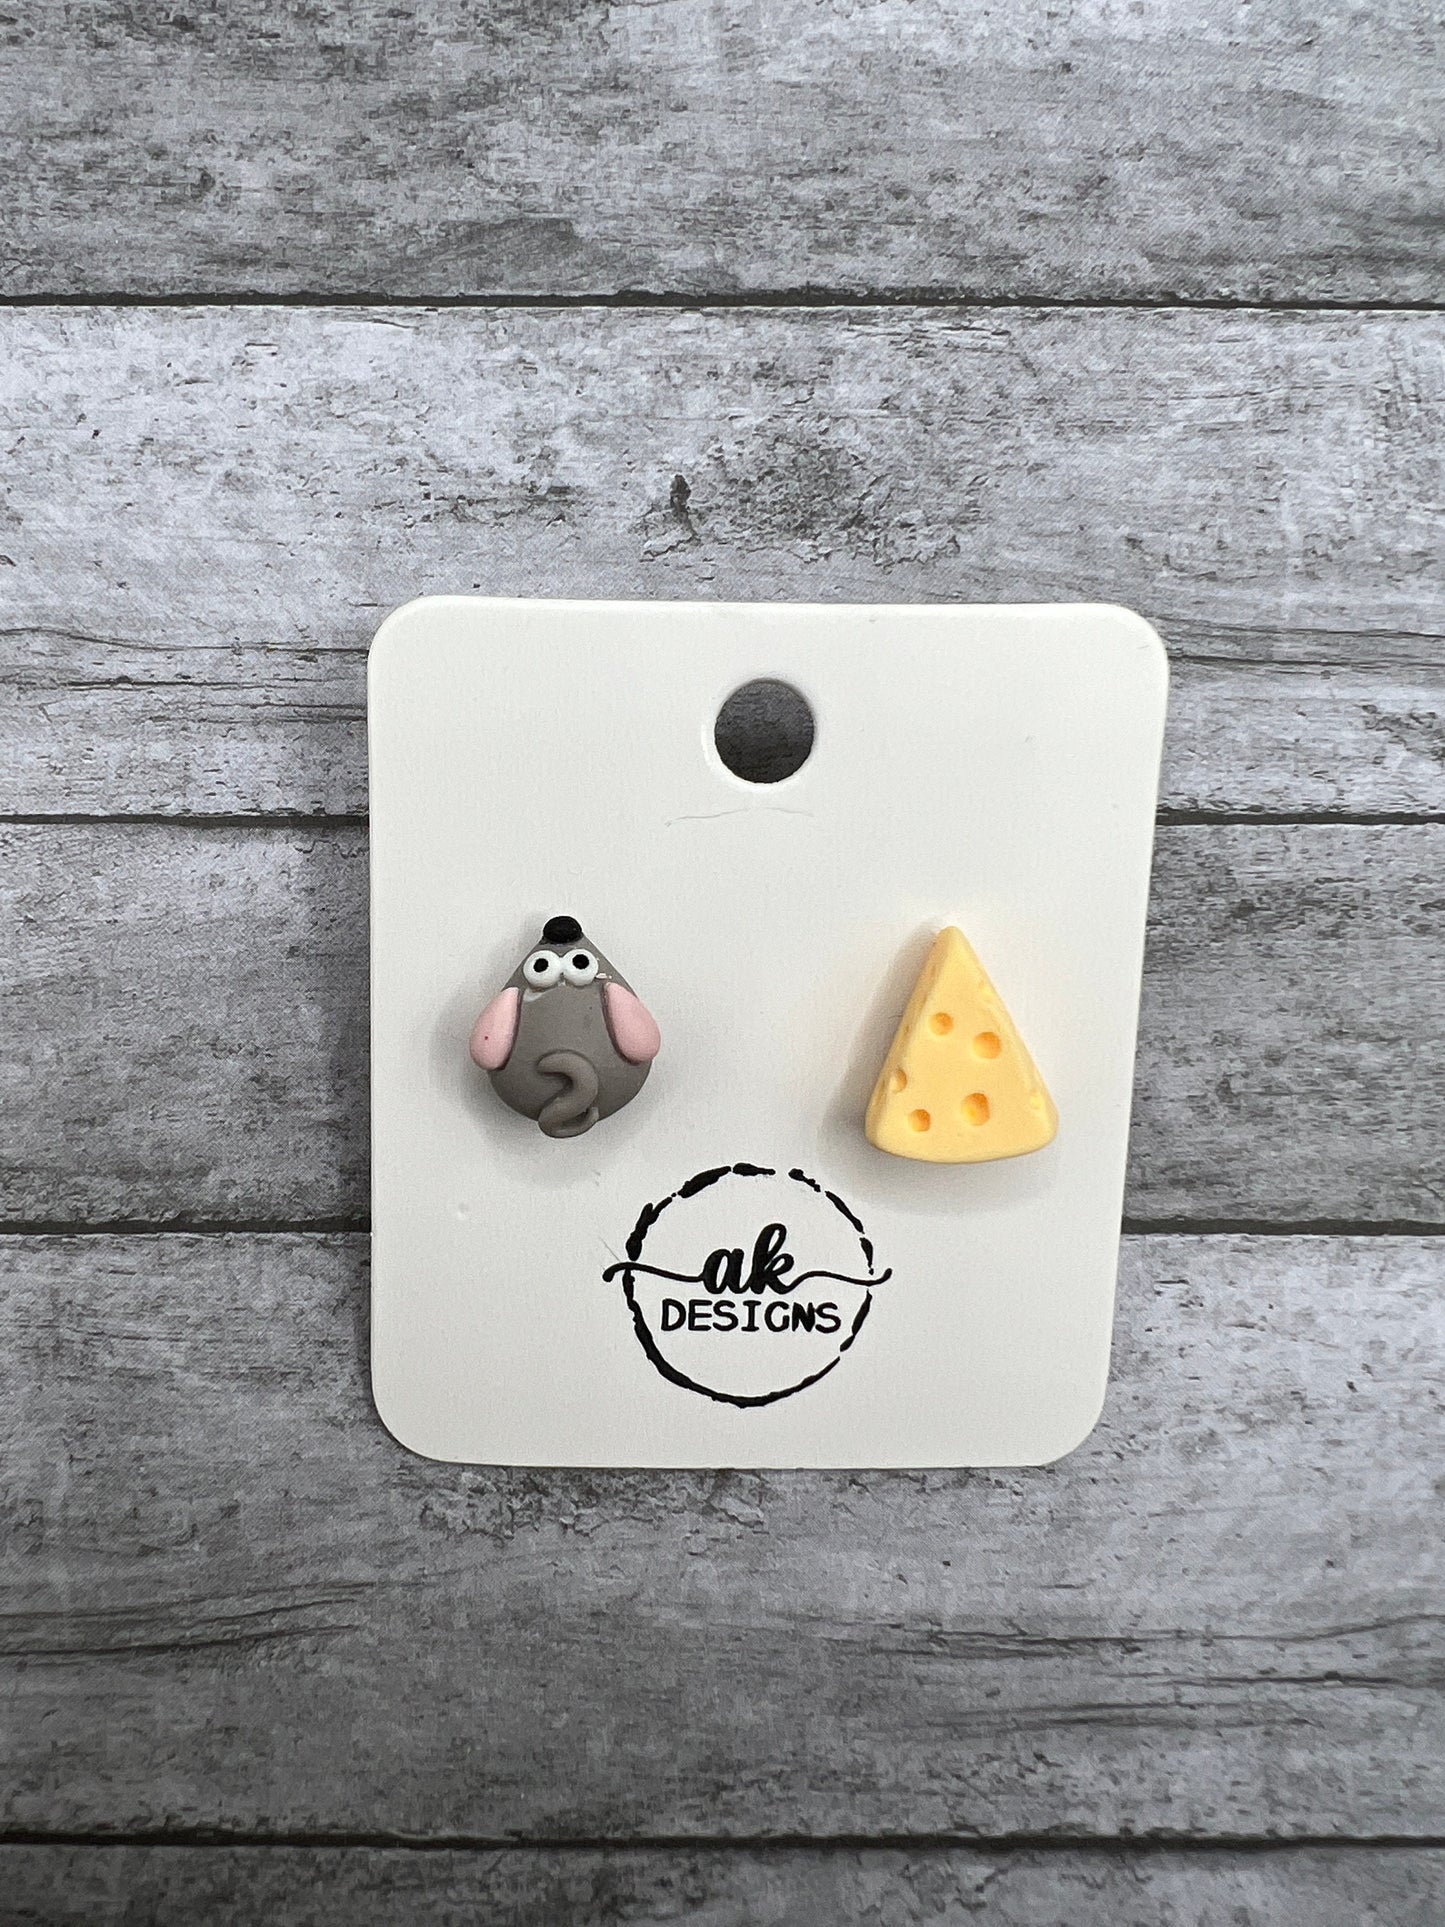 Hypoallergenic Mismatched Mouse Cheese Dog House Flamingo Palm Princess Apple Tiny Petite Stud Earrings